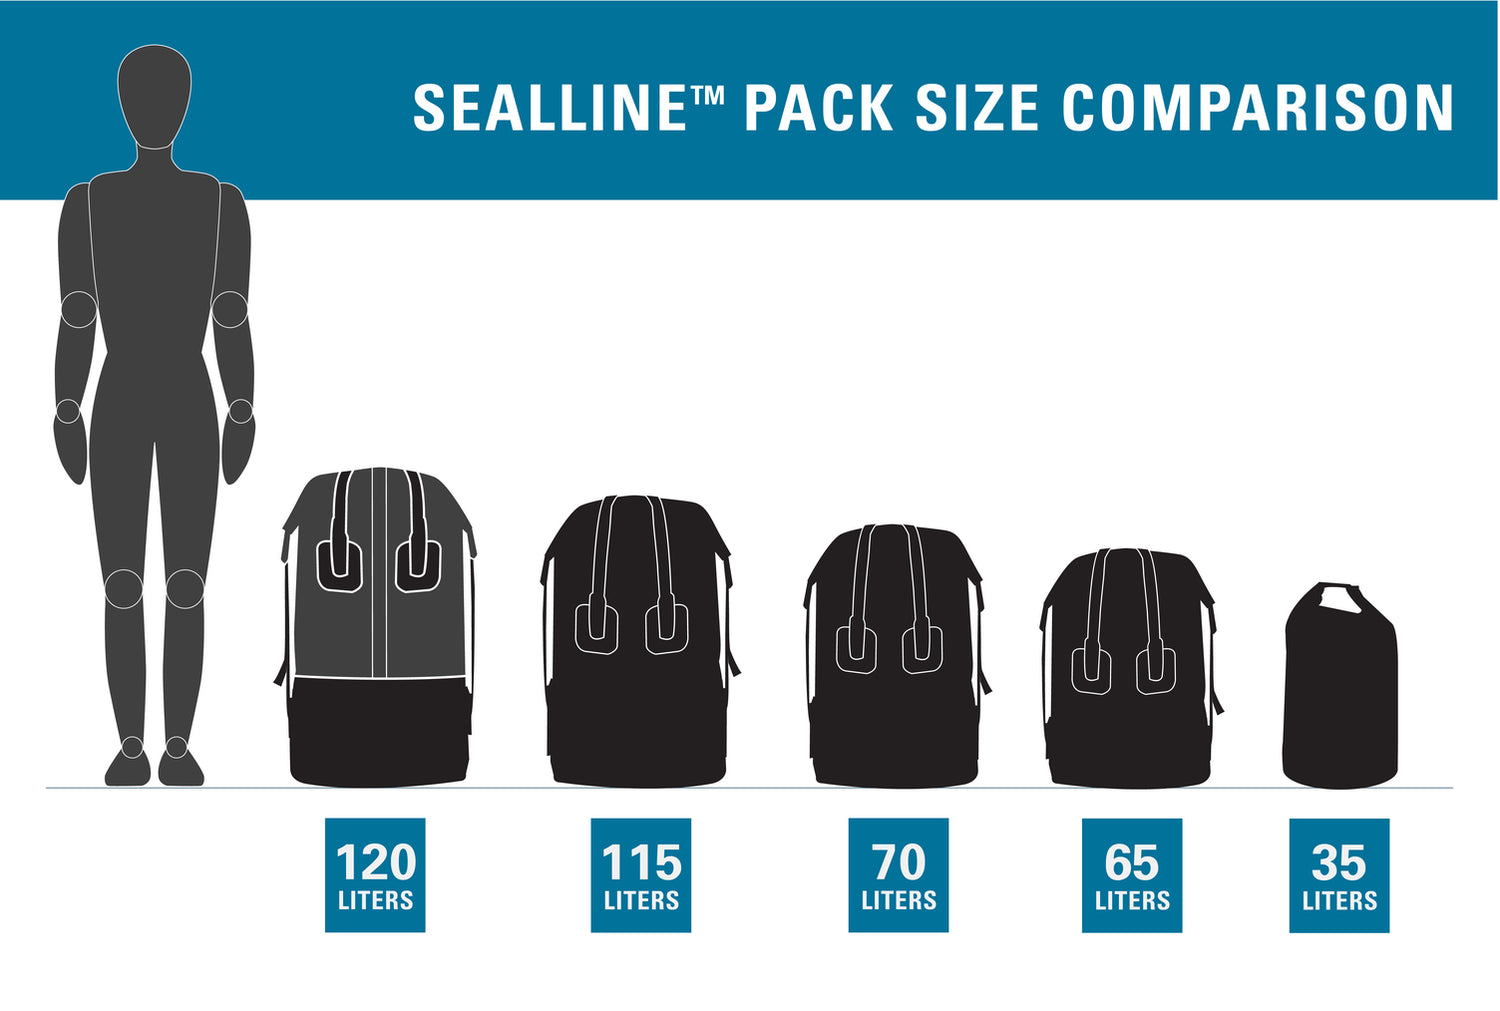 SealLine Boundary Pack 35L Red